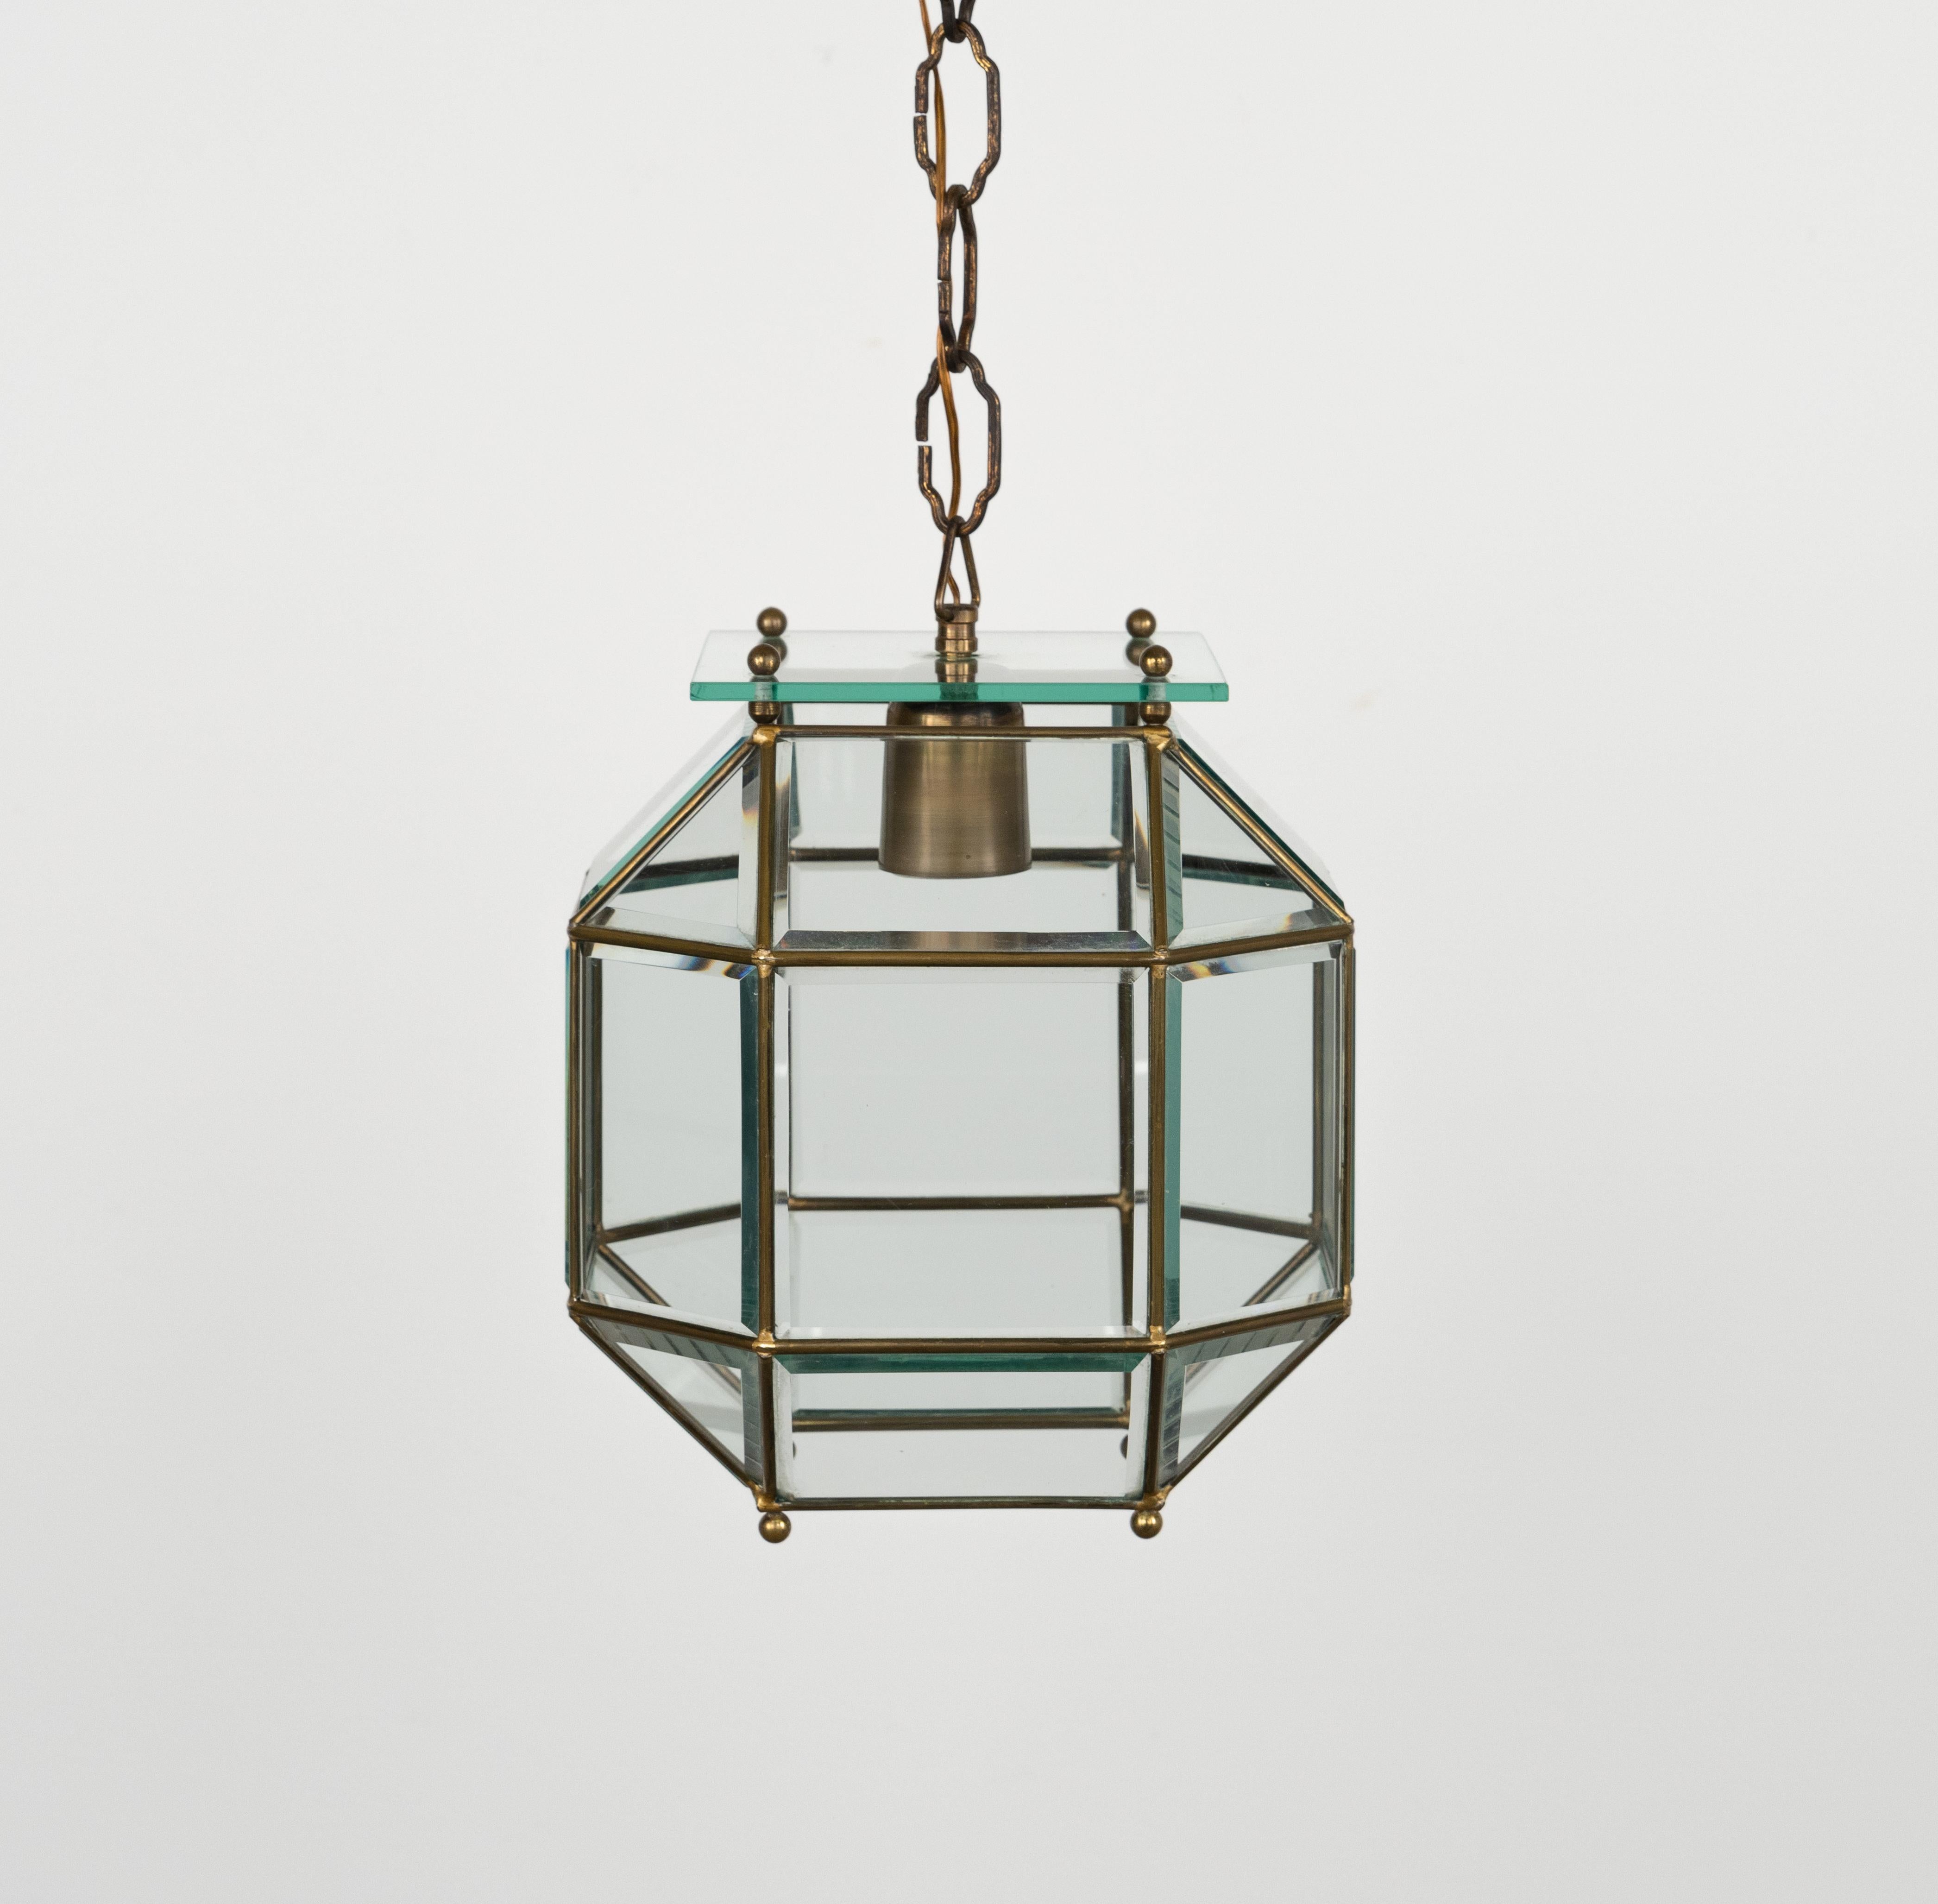 Mid-20th Century Midcentury Chandelier in Brass and Beveled Glass Adolf Loos Style, Italy 1950s For Sale